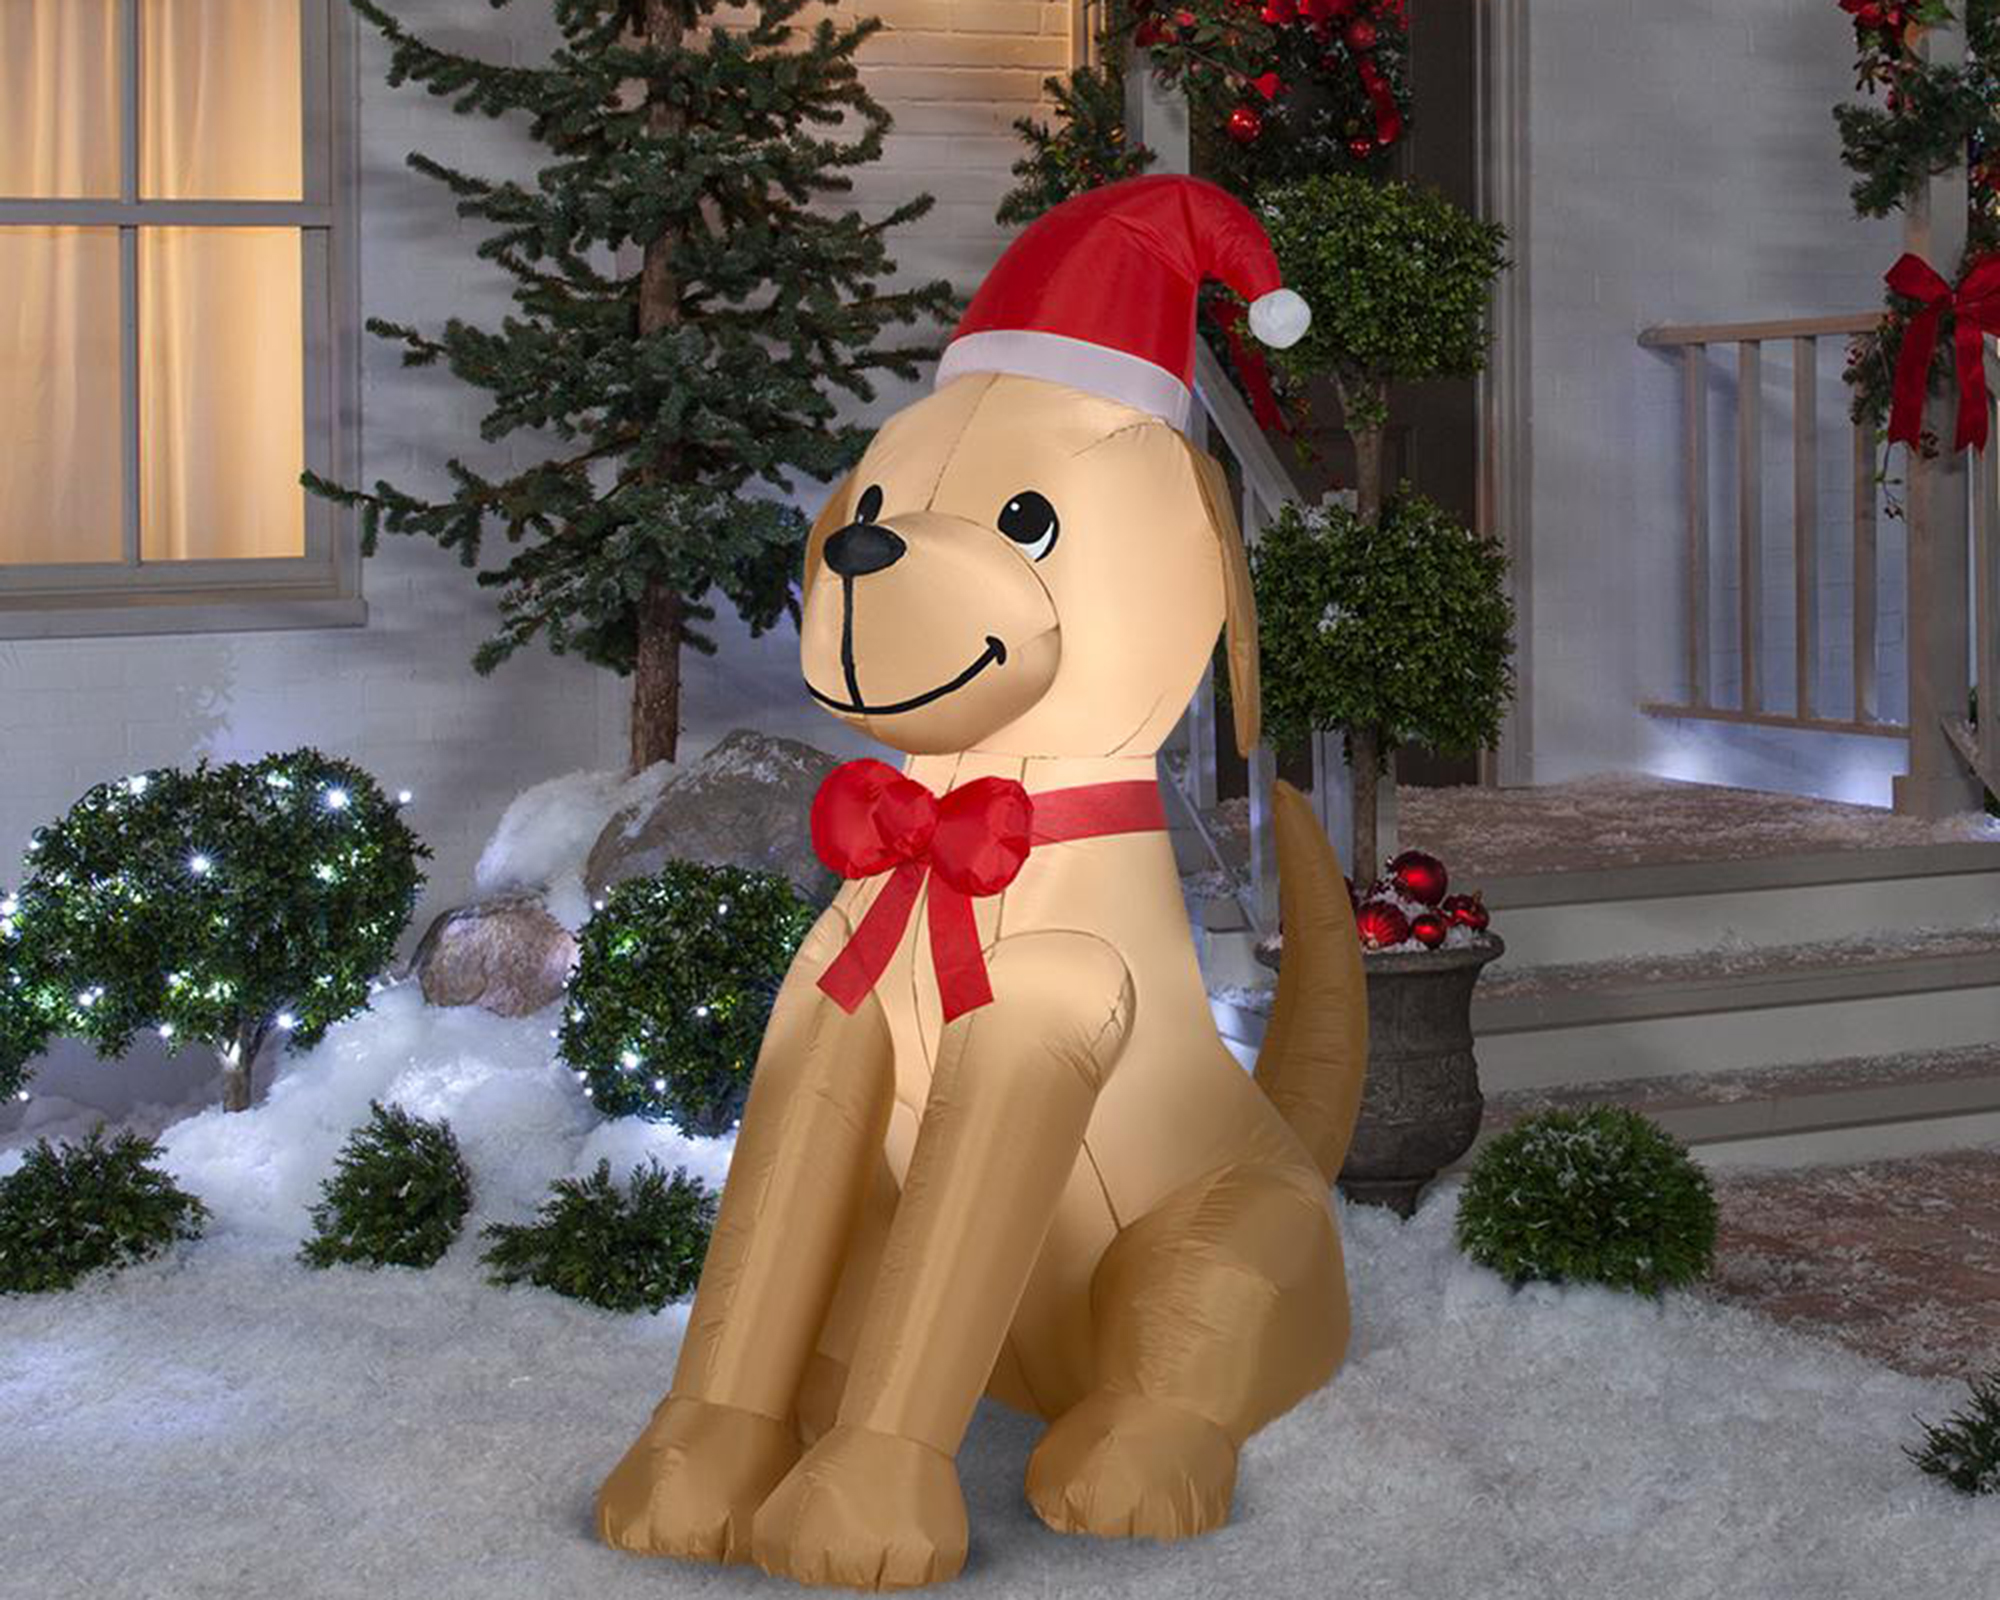 A 6 ft. inflatable Golden Retriever dog decoration with bow and Santa hat